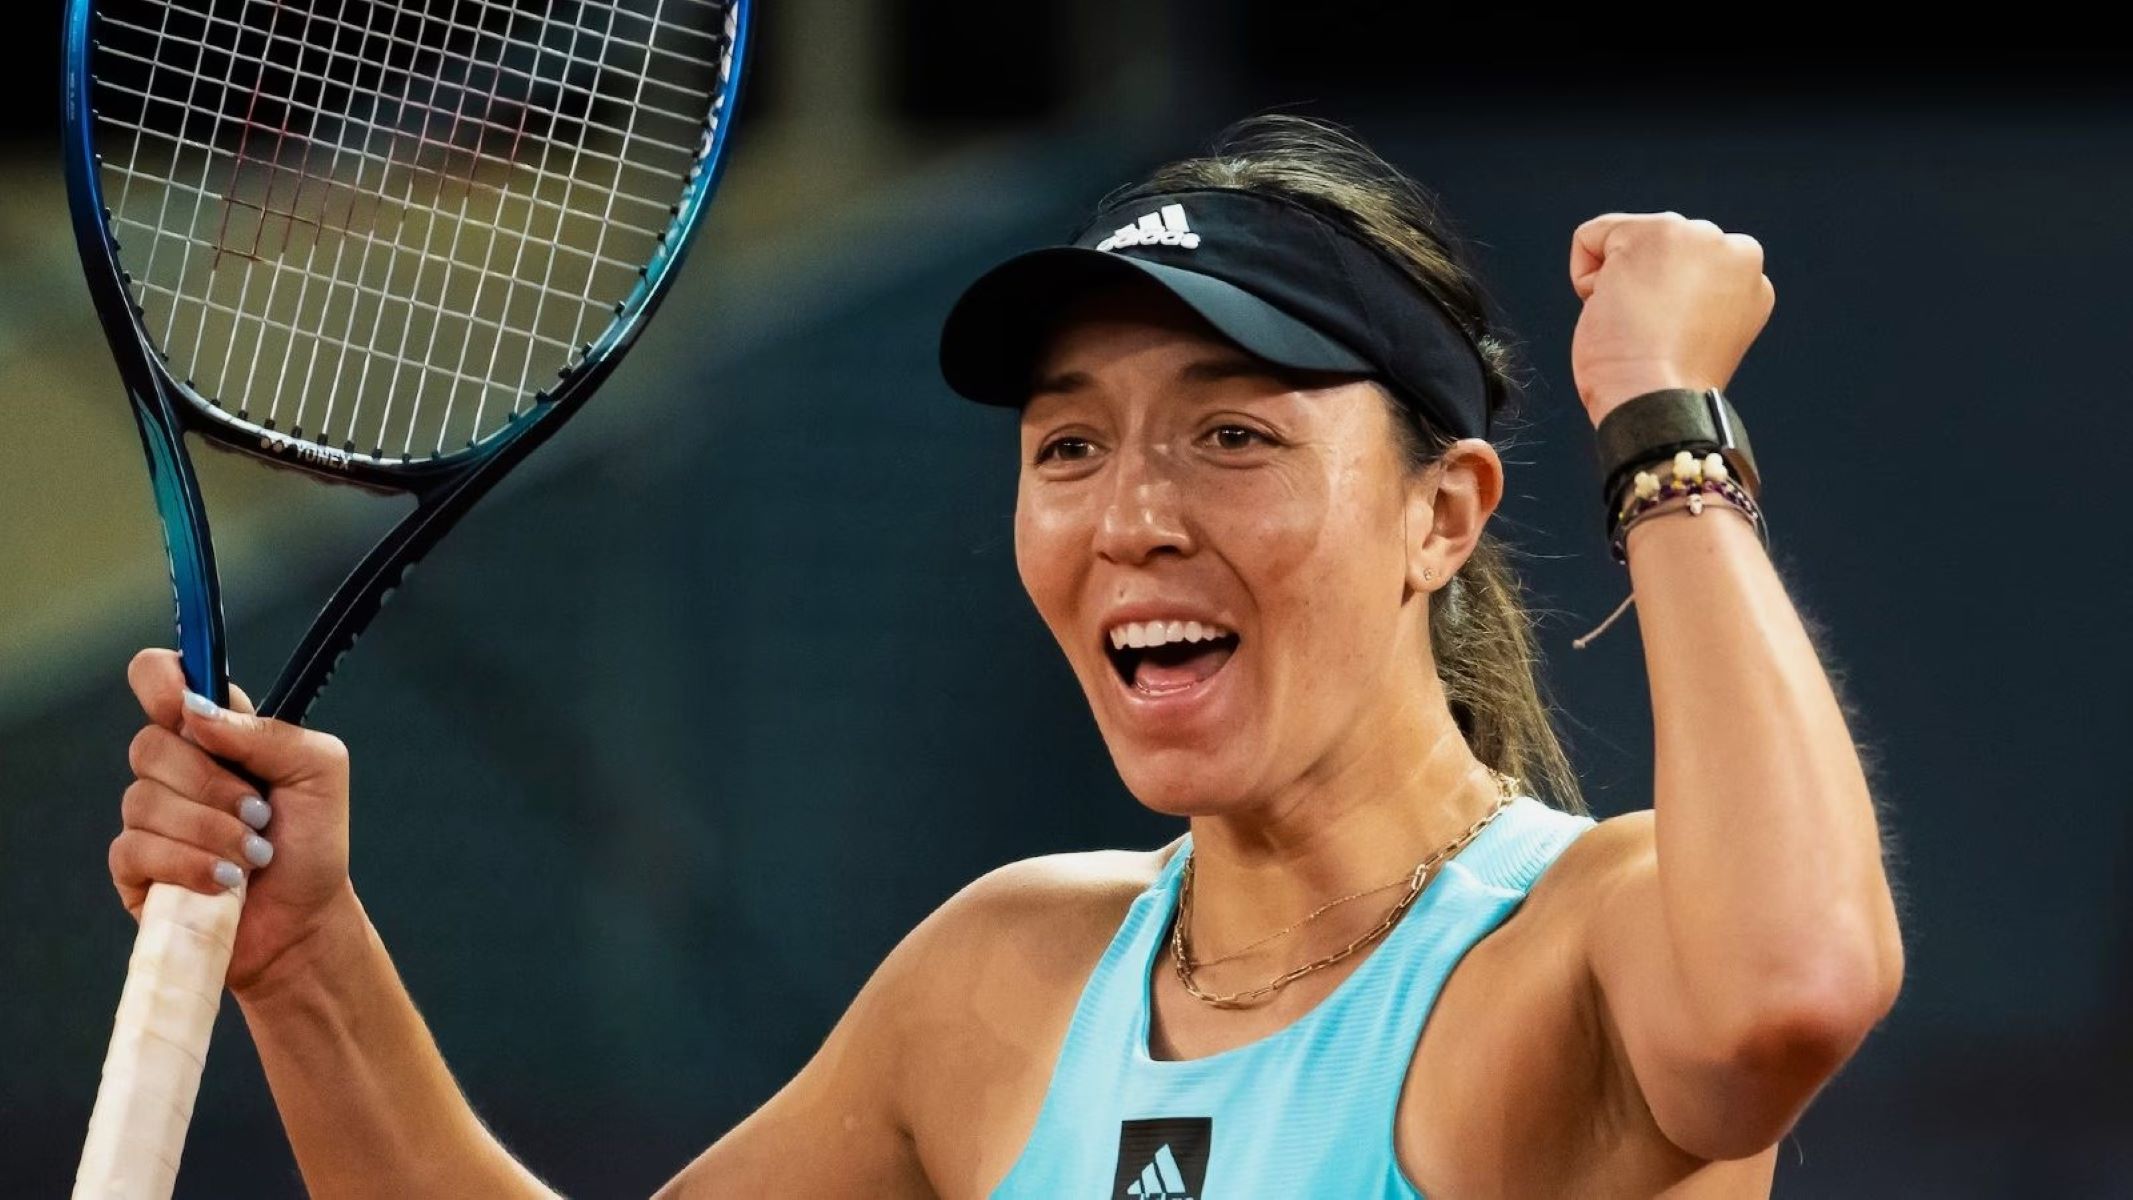 21 Fascinating Facts About Jessica Pegula - Facts.net